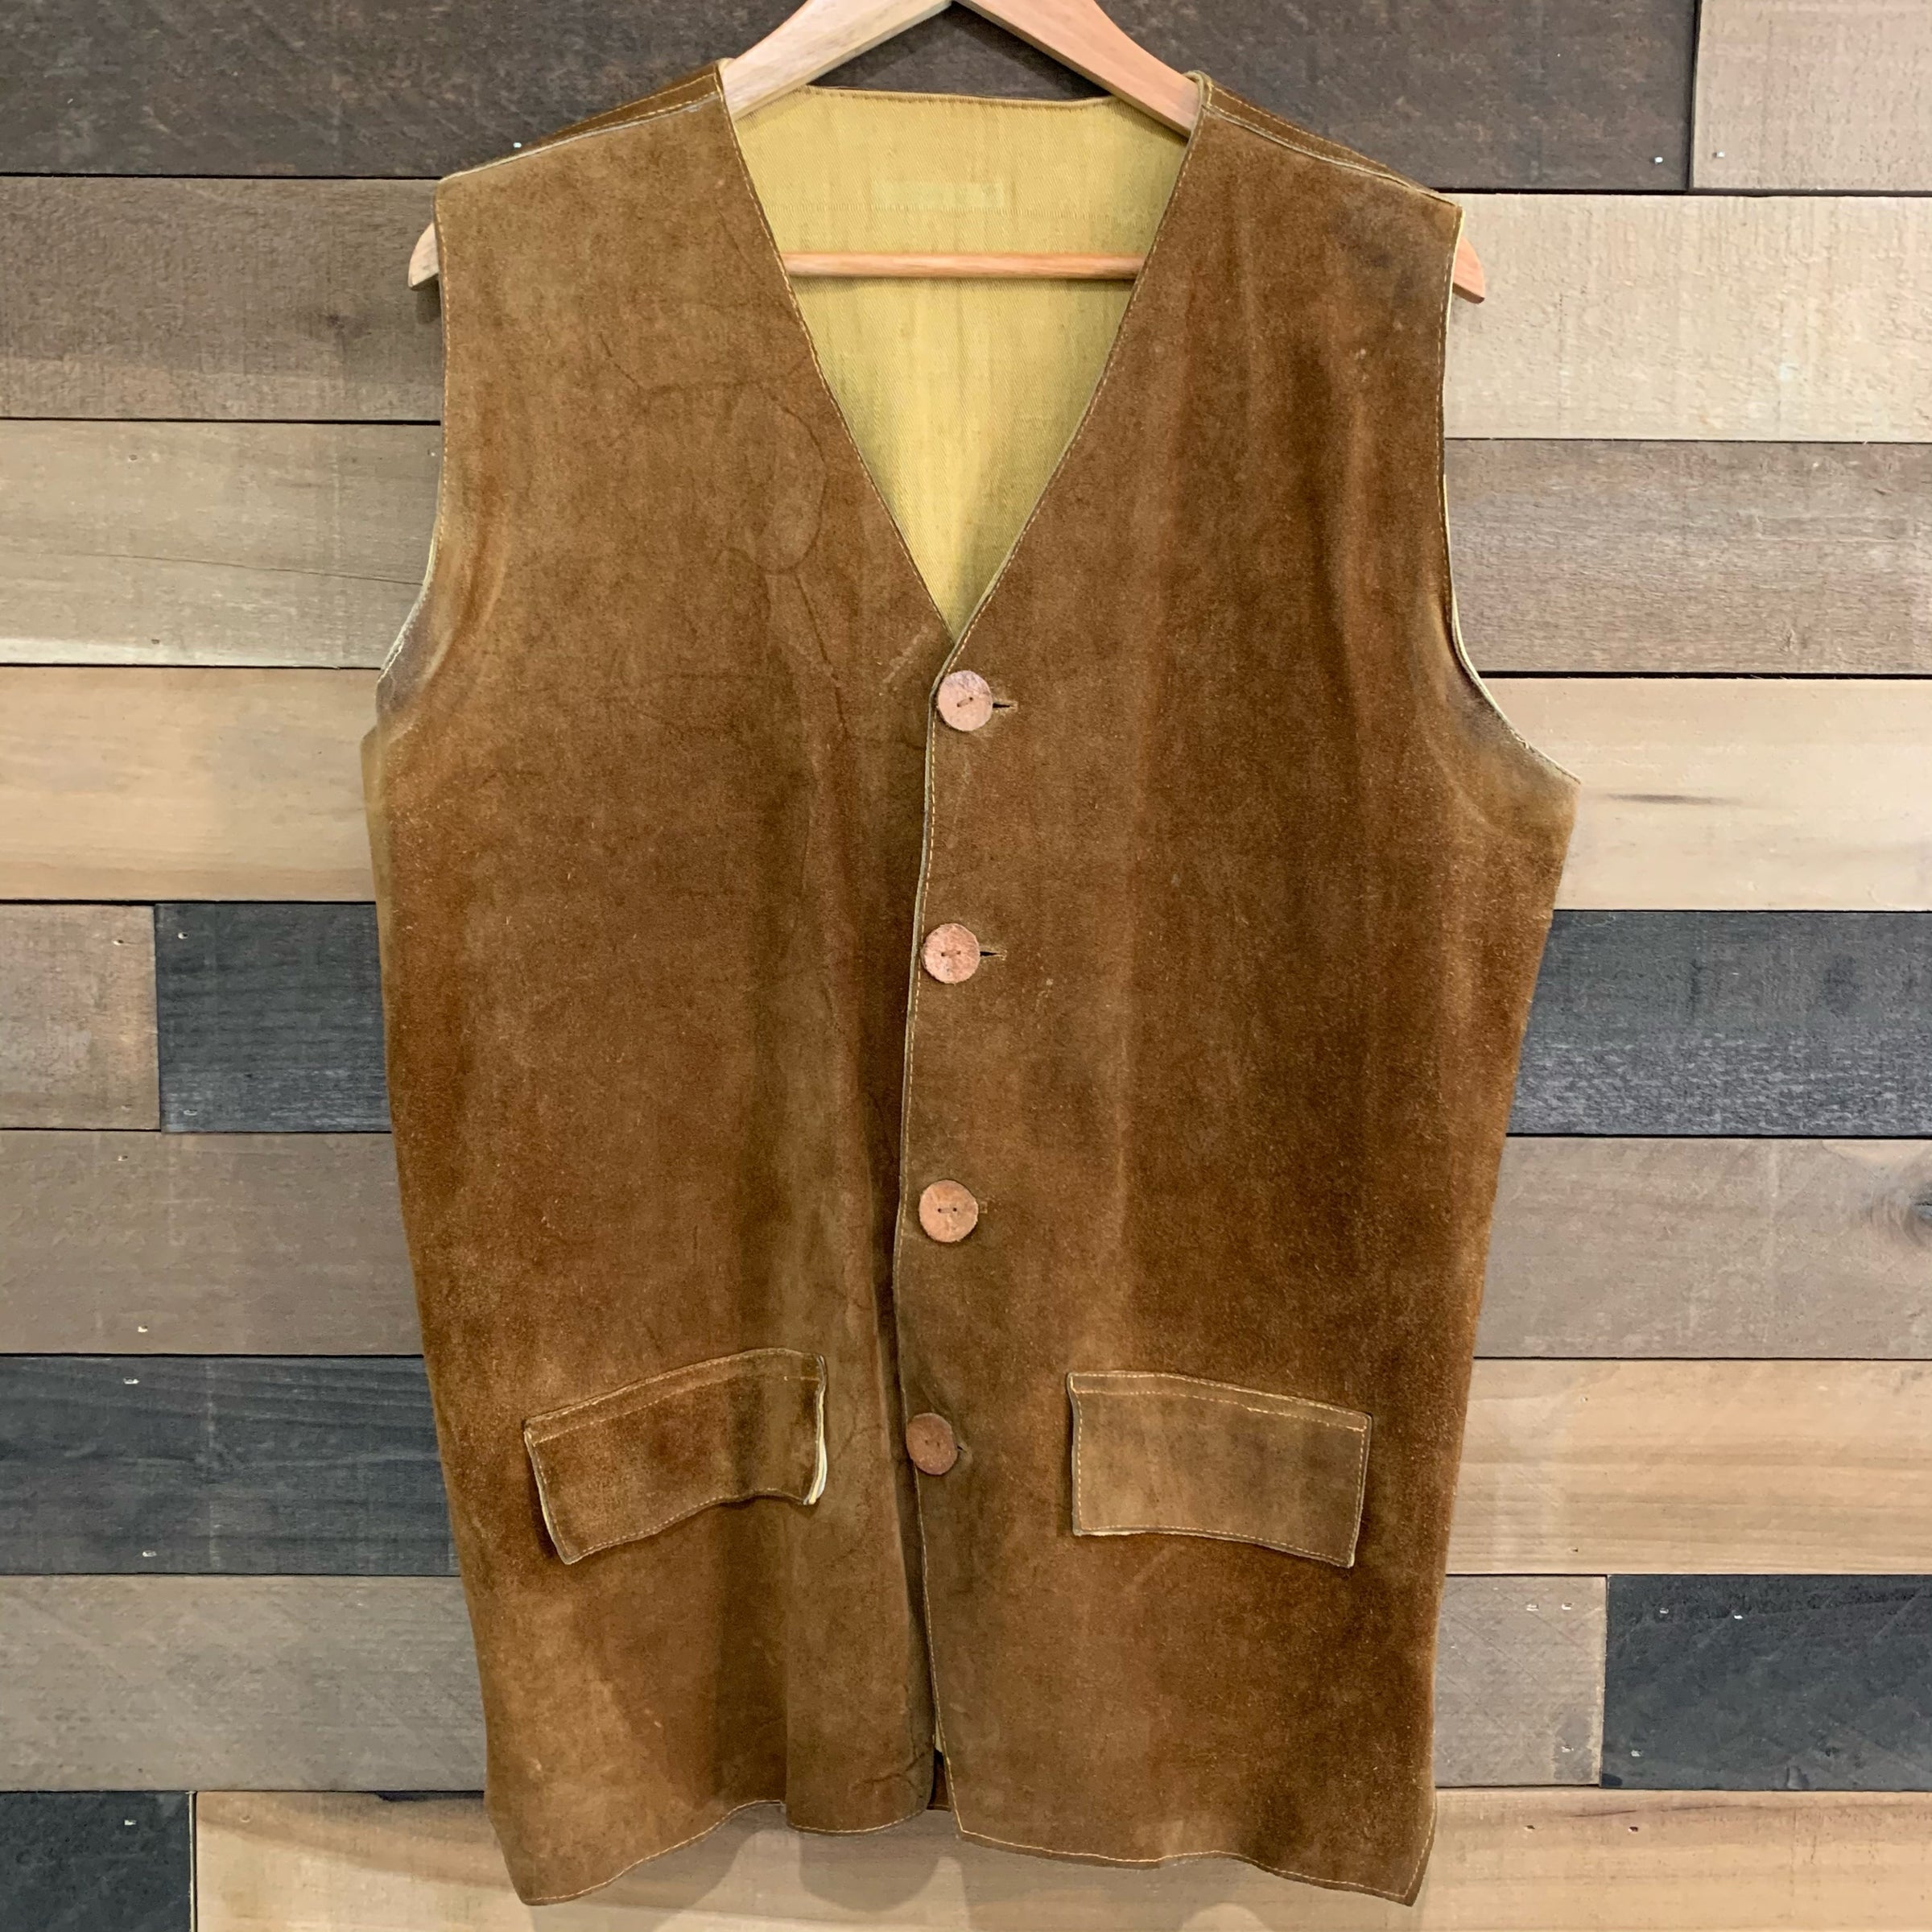 1960's/1970's Homemade Hippy Suede Leather Vest with Embroidered Hidden Pocket Medium